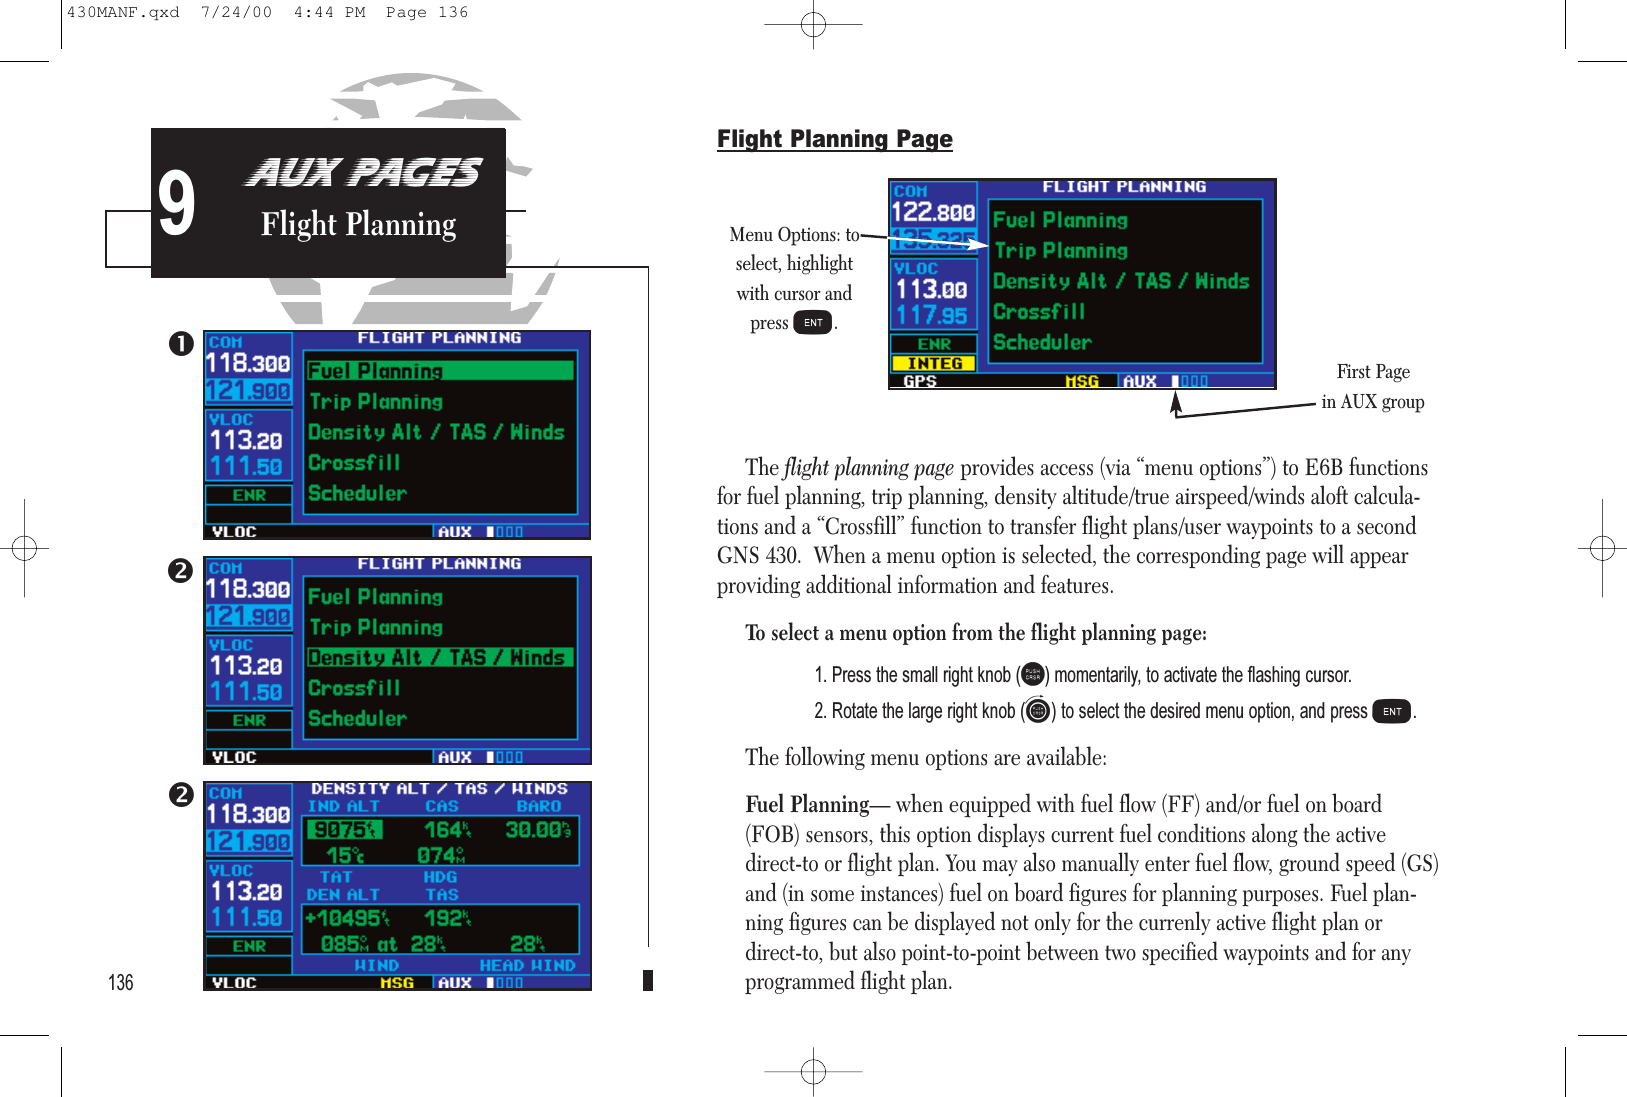 AUX PAGESFlight Planning9Flight Planning PageThe flight planning page provides access (via “menu options”) to E6B functionsfor fuel planning, trip planning, density altitude/true airspeed/winds aloft calcula-tions and a “Crossfill” function to transfer flight plans/user waypoints to a secondGNS 430.  When a menu option is selected, the corresponding page will appearproviding additional information and features.To select a menu option from the flight planning page:1. Press the small right knob (r) momentarily, to activate the flashing cursor.2. Rotate the large right knob (d) to select the desired menu option, and press E.The following menu options are available:Fuel Planning— when equipped with fuel flow (FF) and/or fuel on board(FOB) sensors, this option displays current fuel conditions along the activedirect-to or flight plan. You may also manually enter fuel flow, ground speed (GS)and (in some instances) fuel on board figures for planning purposes. Fuel plan-ning figures can be displayed not only for the currenly active flight plan ordirect-to, but also point-to-point between two specified waypoints and for anyprogrammed flight plan.  136Menu Options: toselect, highlightwith cursor andpress E.First Pagein AUX group430MANF.qxd  7/24/00  4:44 PM  Page 136